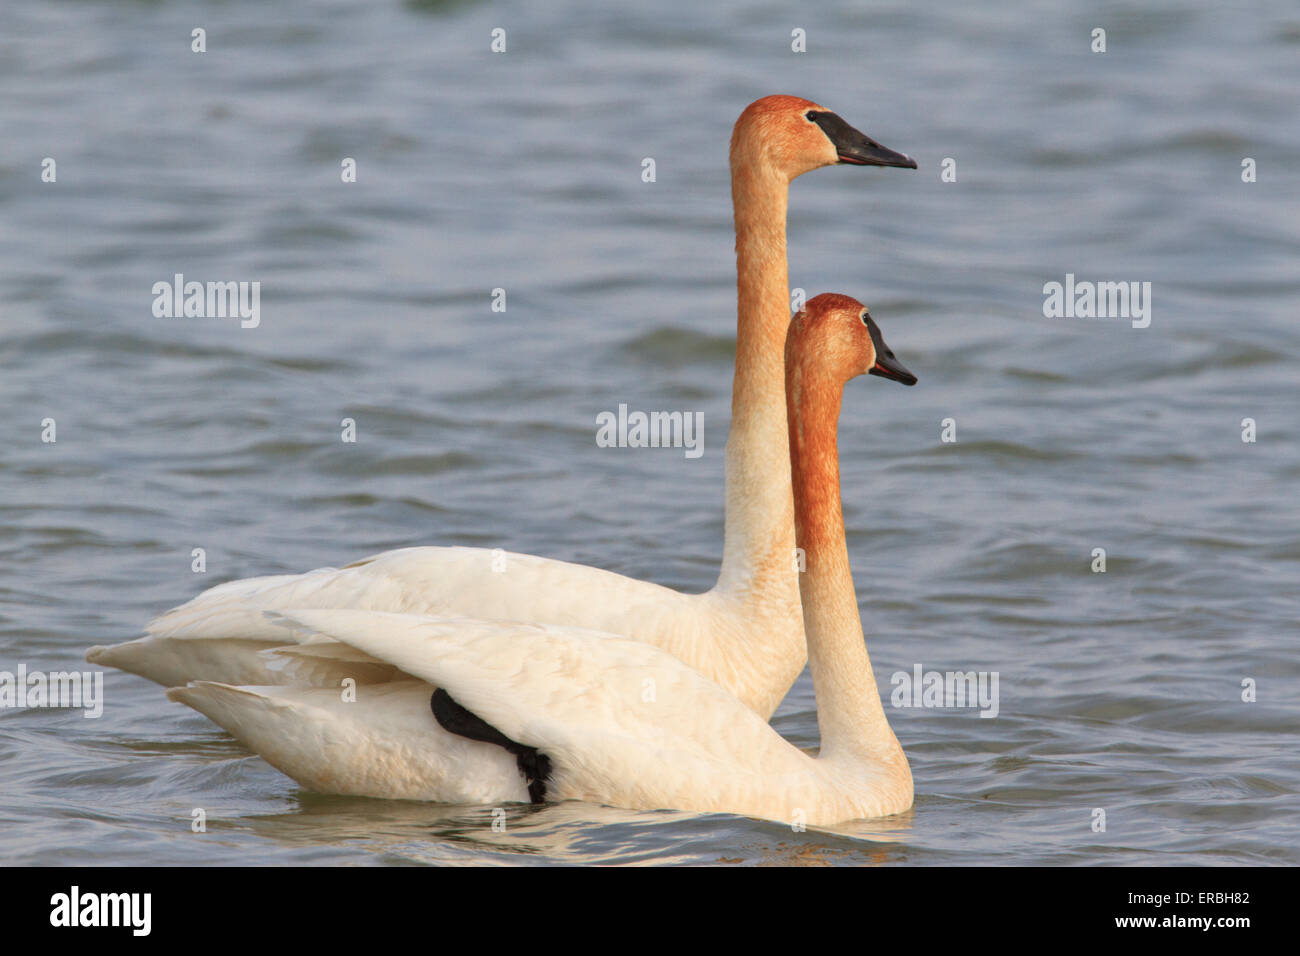 Pair of trumpeter swan (Cygnus buccinator), with necks stained brown from feeding Stock Photo